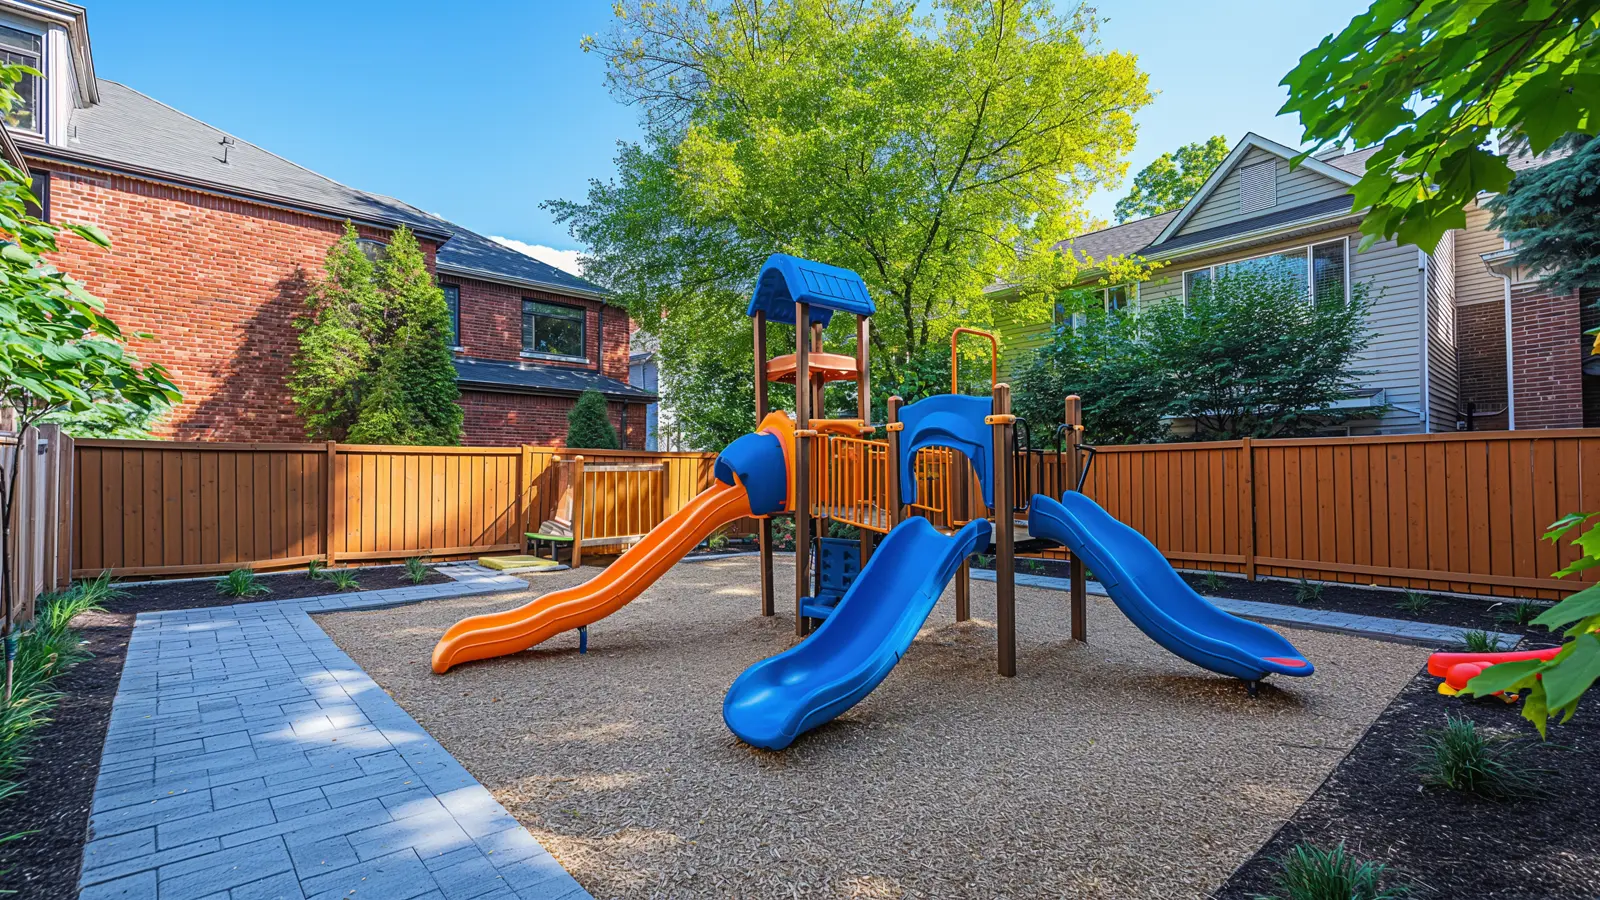 Creative Playground Ideas for Small Backyards